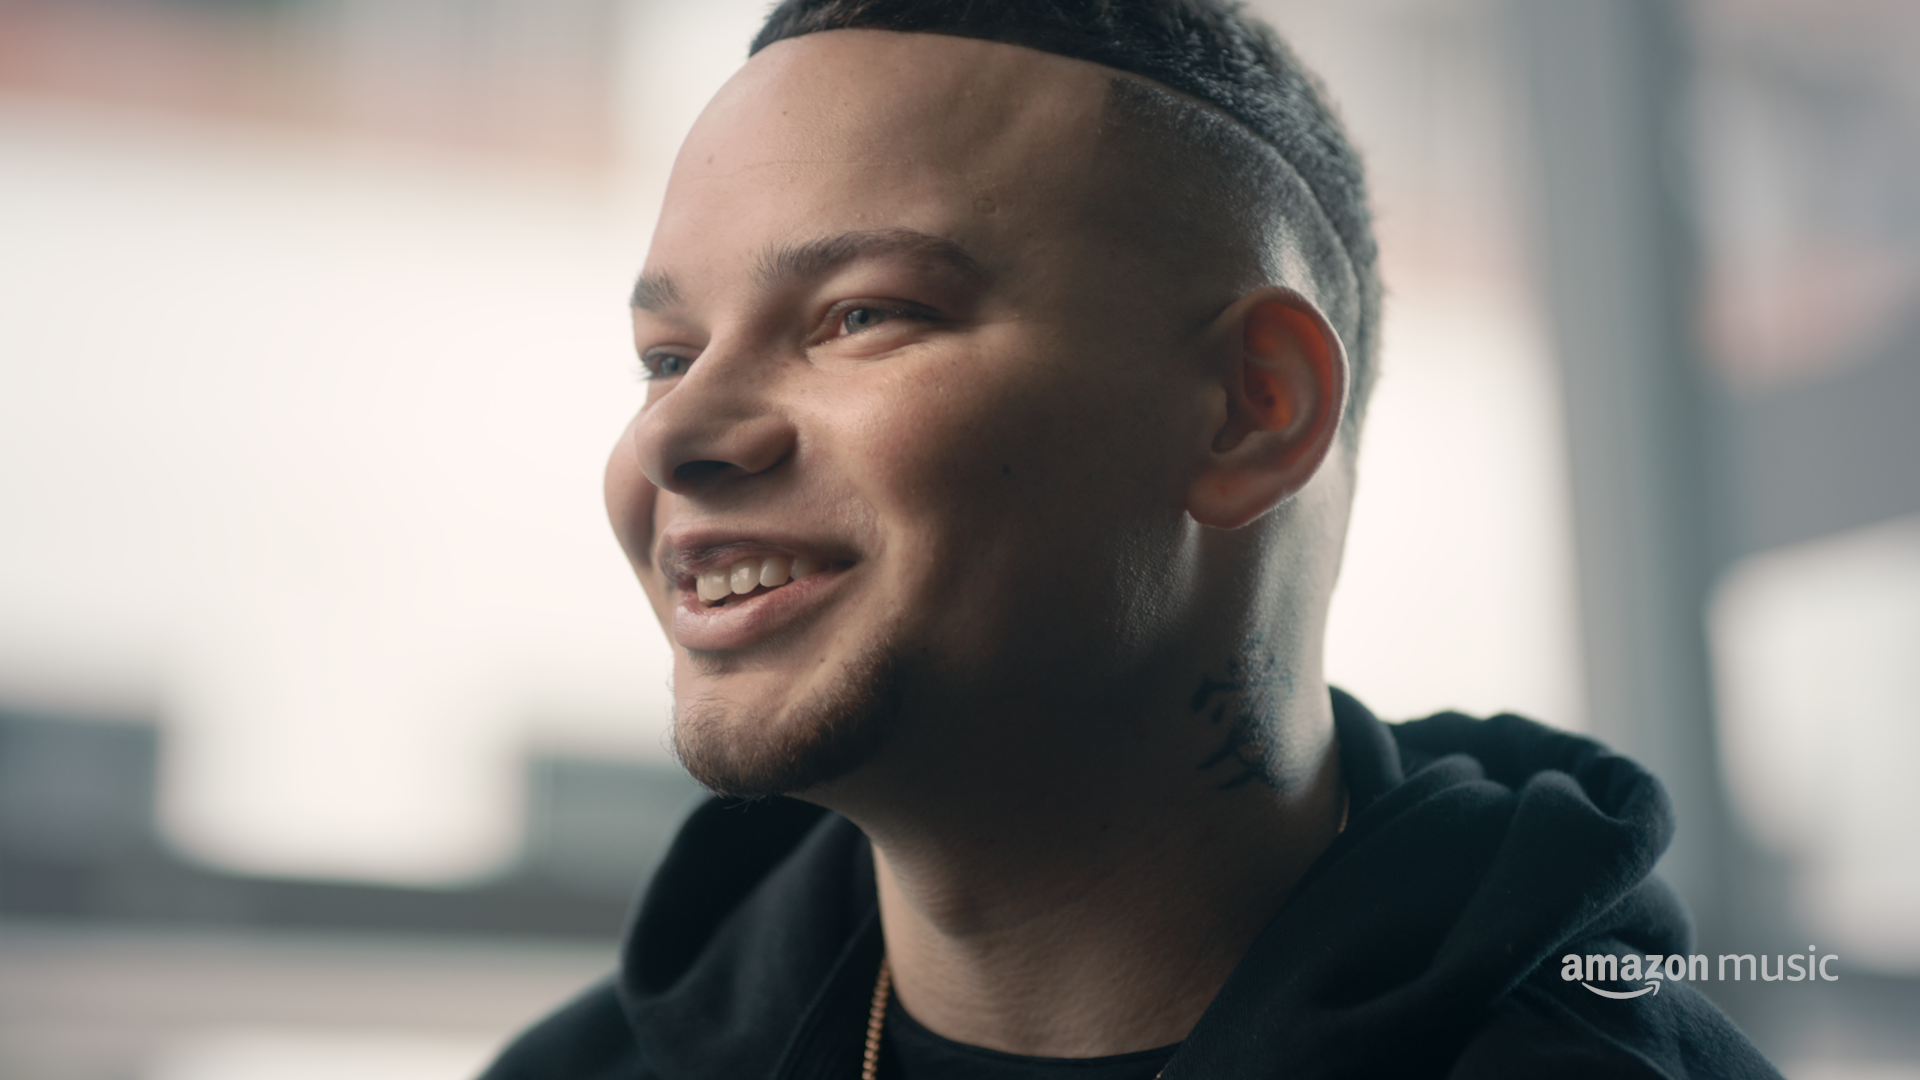 Kane Brown Pairs With Amazon Music For Mini Documentary, 'Velocity' Sounds Like Nashville